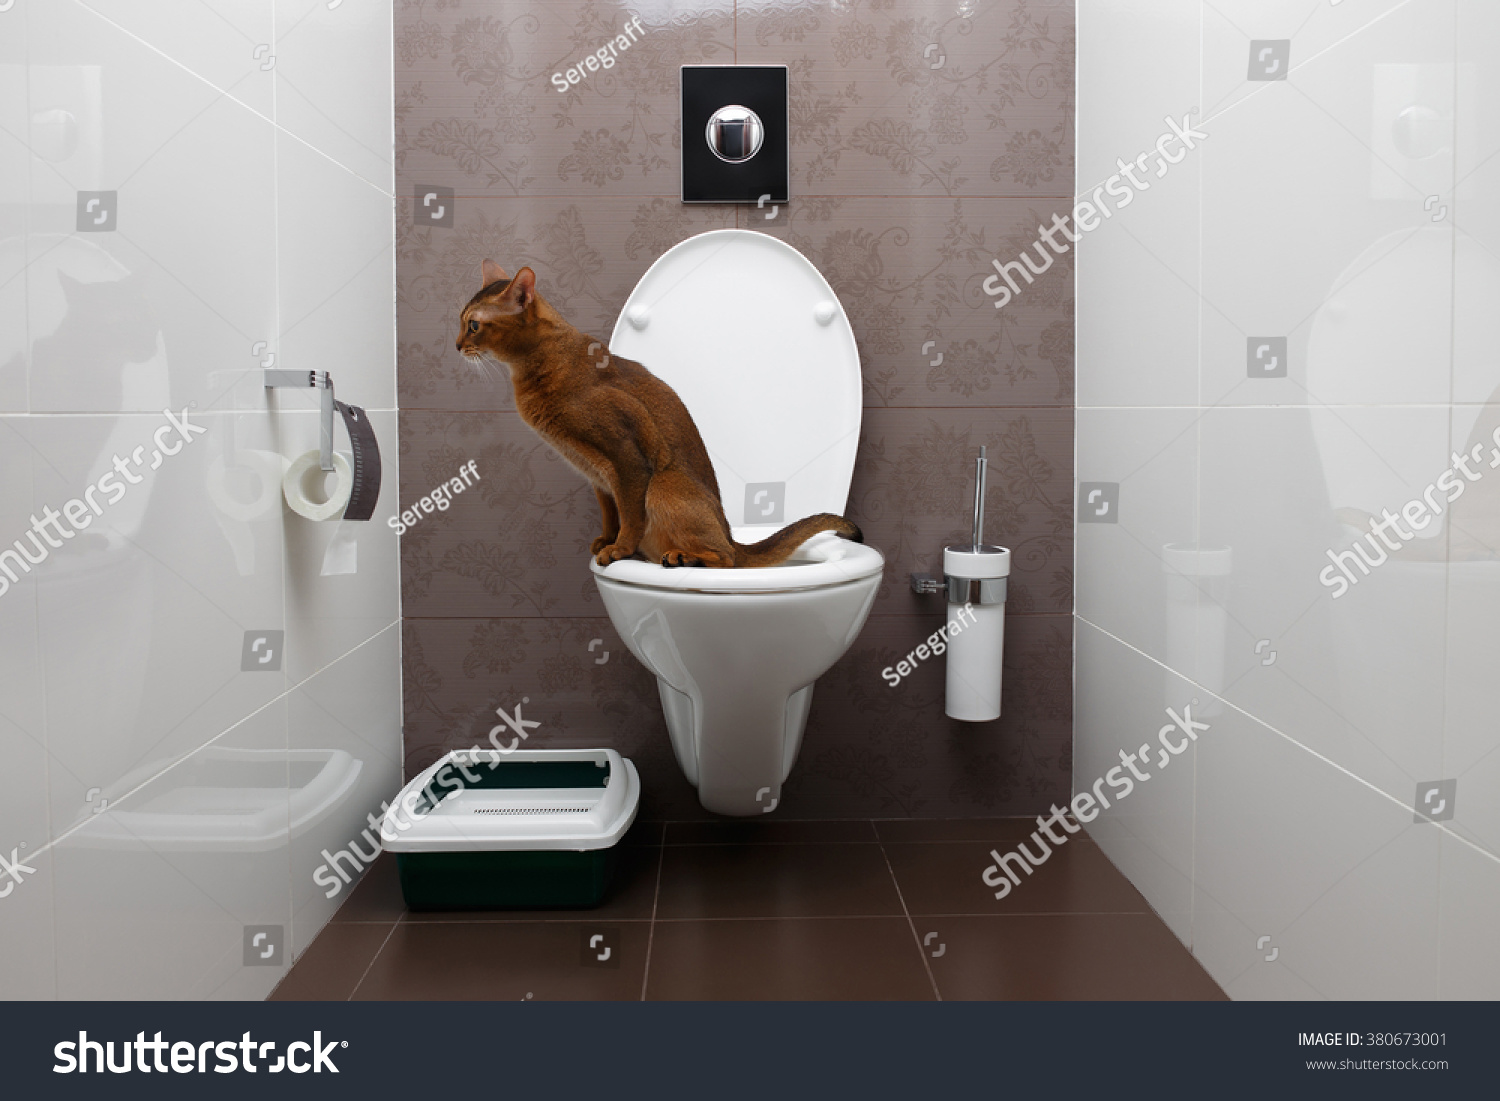 Clever Abyssinian Cat Uses Toilet Bowl Stock Photo (Edit Now) 380673001